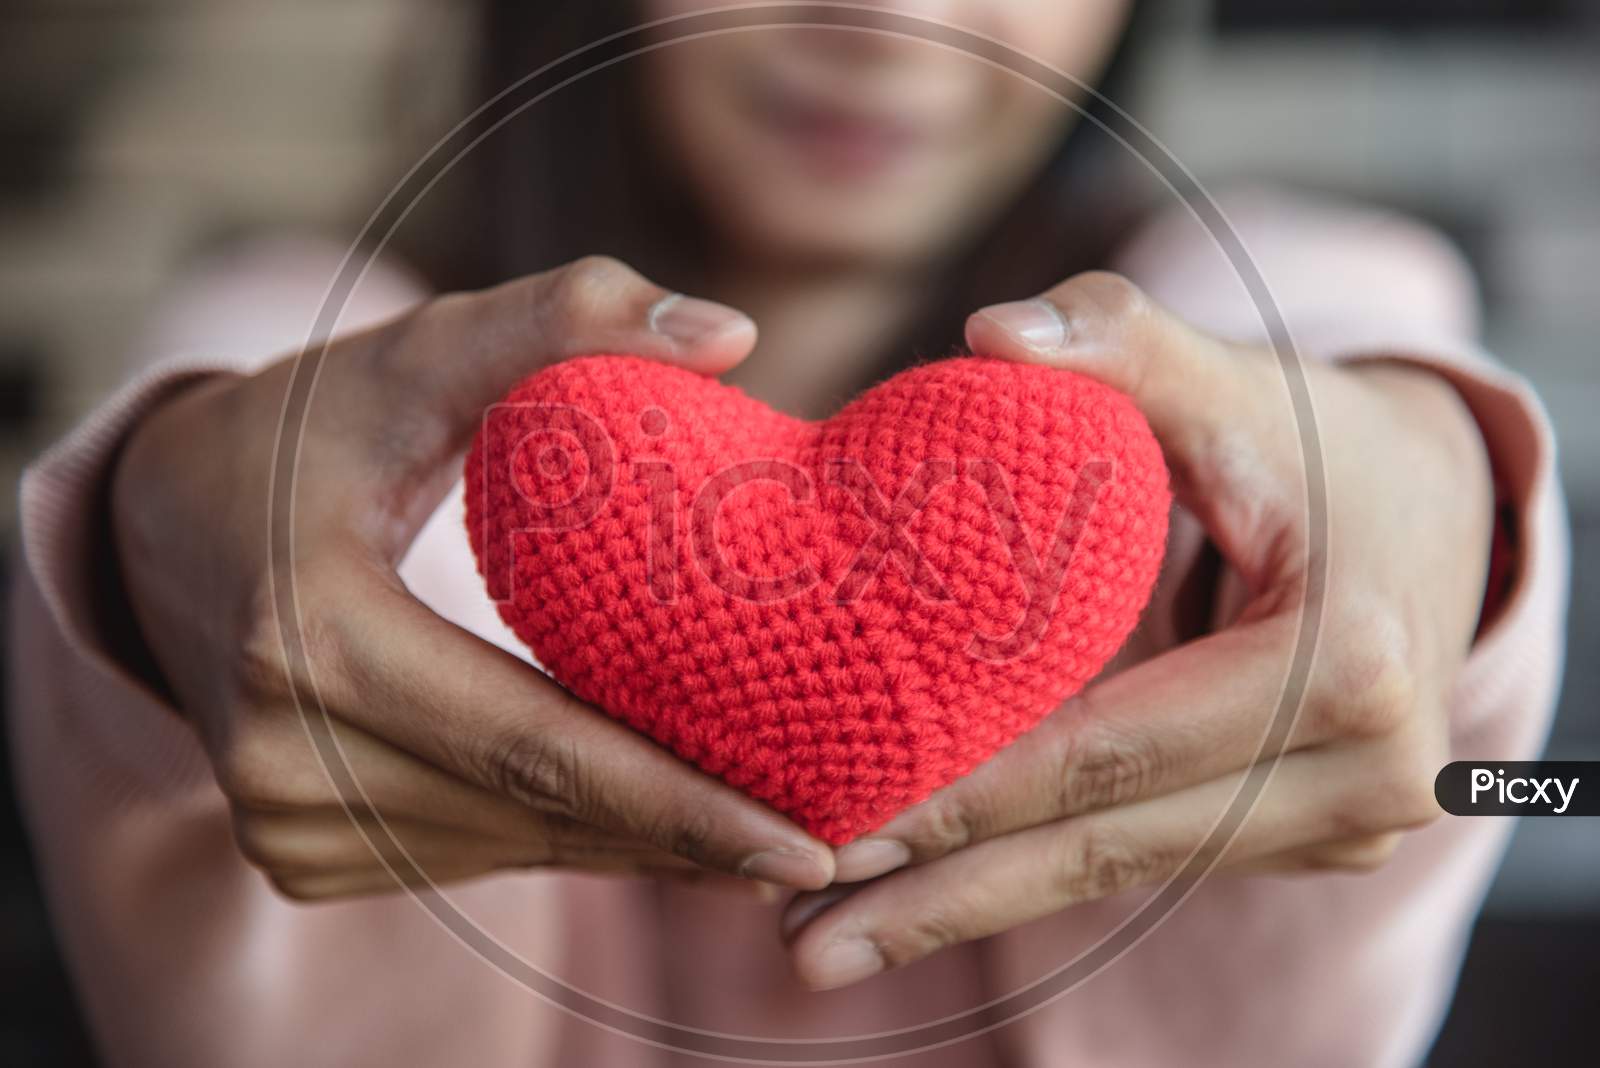 Big Red Yarn Heart Holding And Giving To Front By Woman Hand. Love And Affection In Valentines Day Concept. Romantic Object And Health Care.